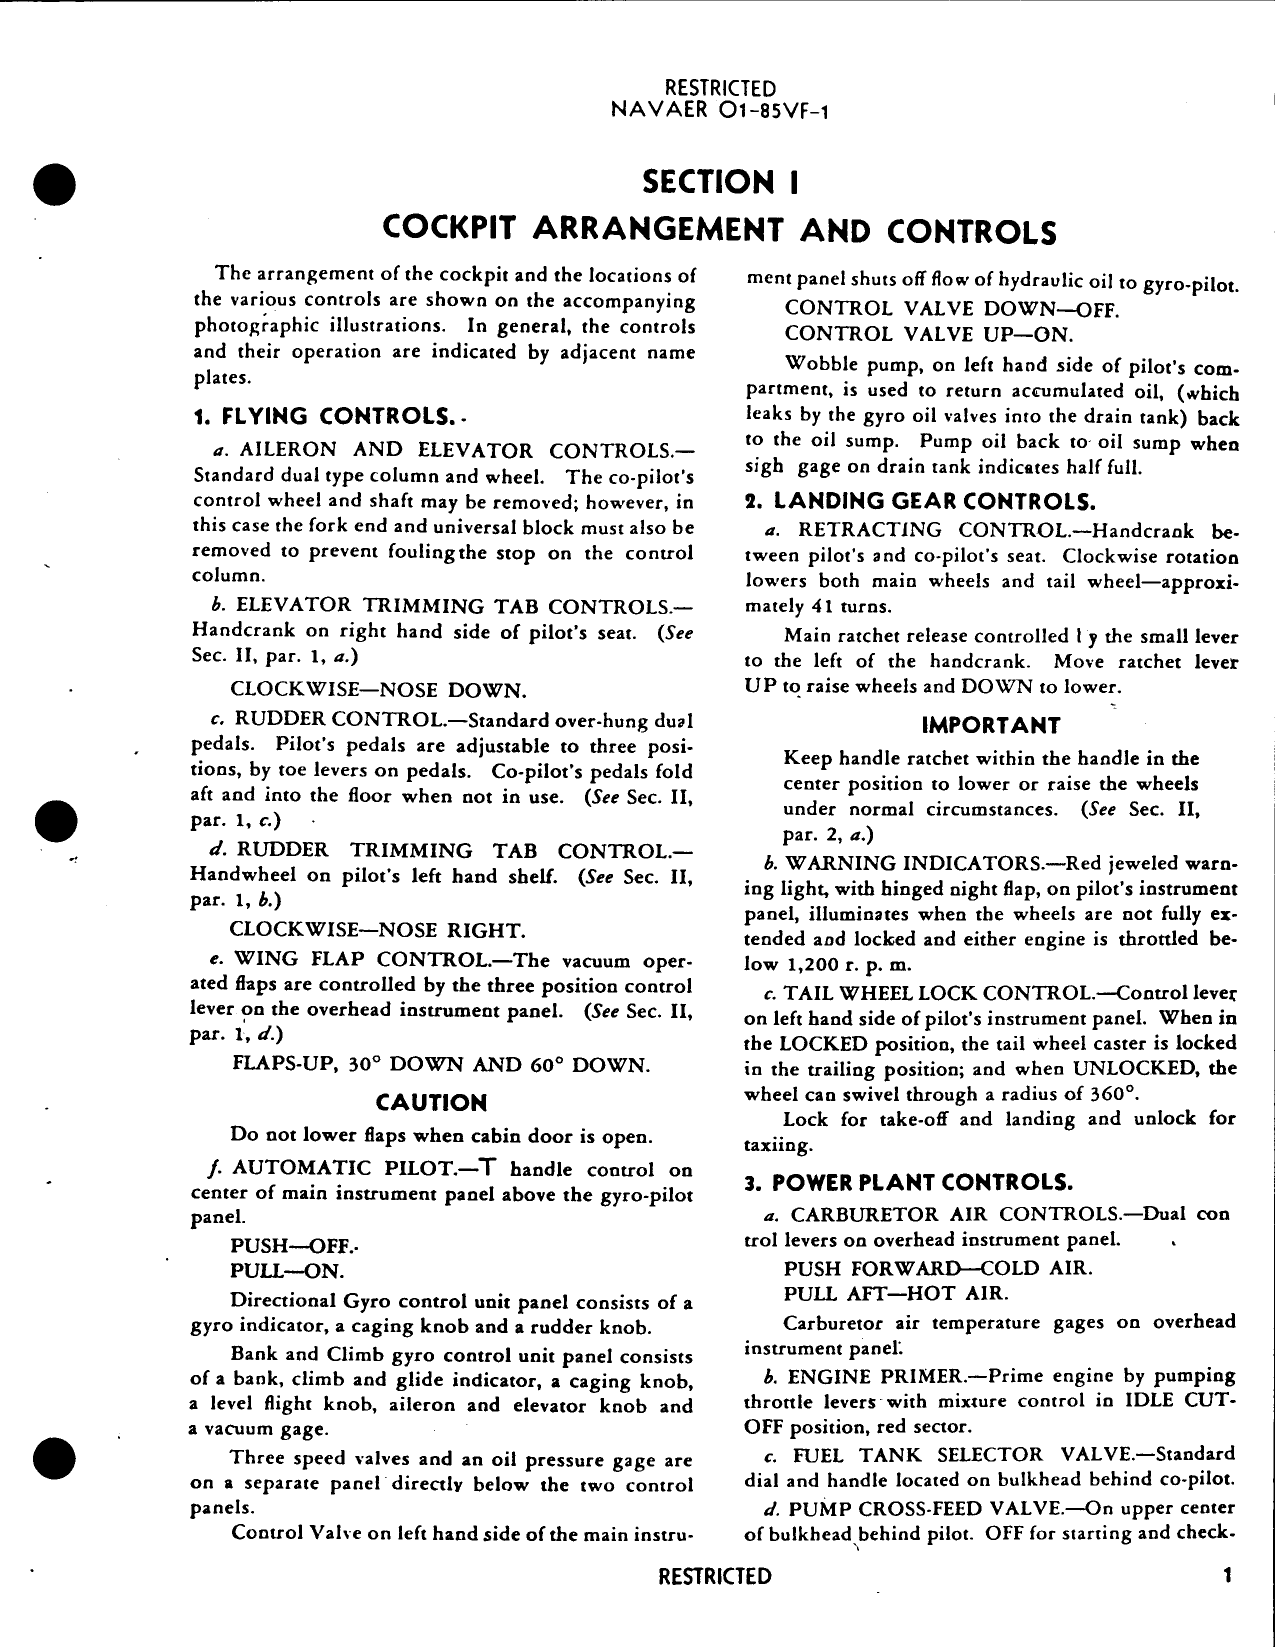 Sample page  5 from AirCorps Library document: Flight Operating Instructions - Grumman Goose JRF-5 